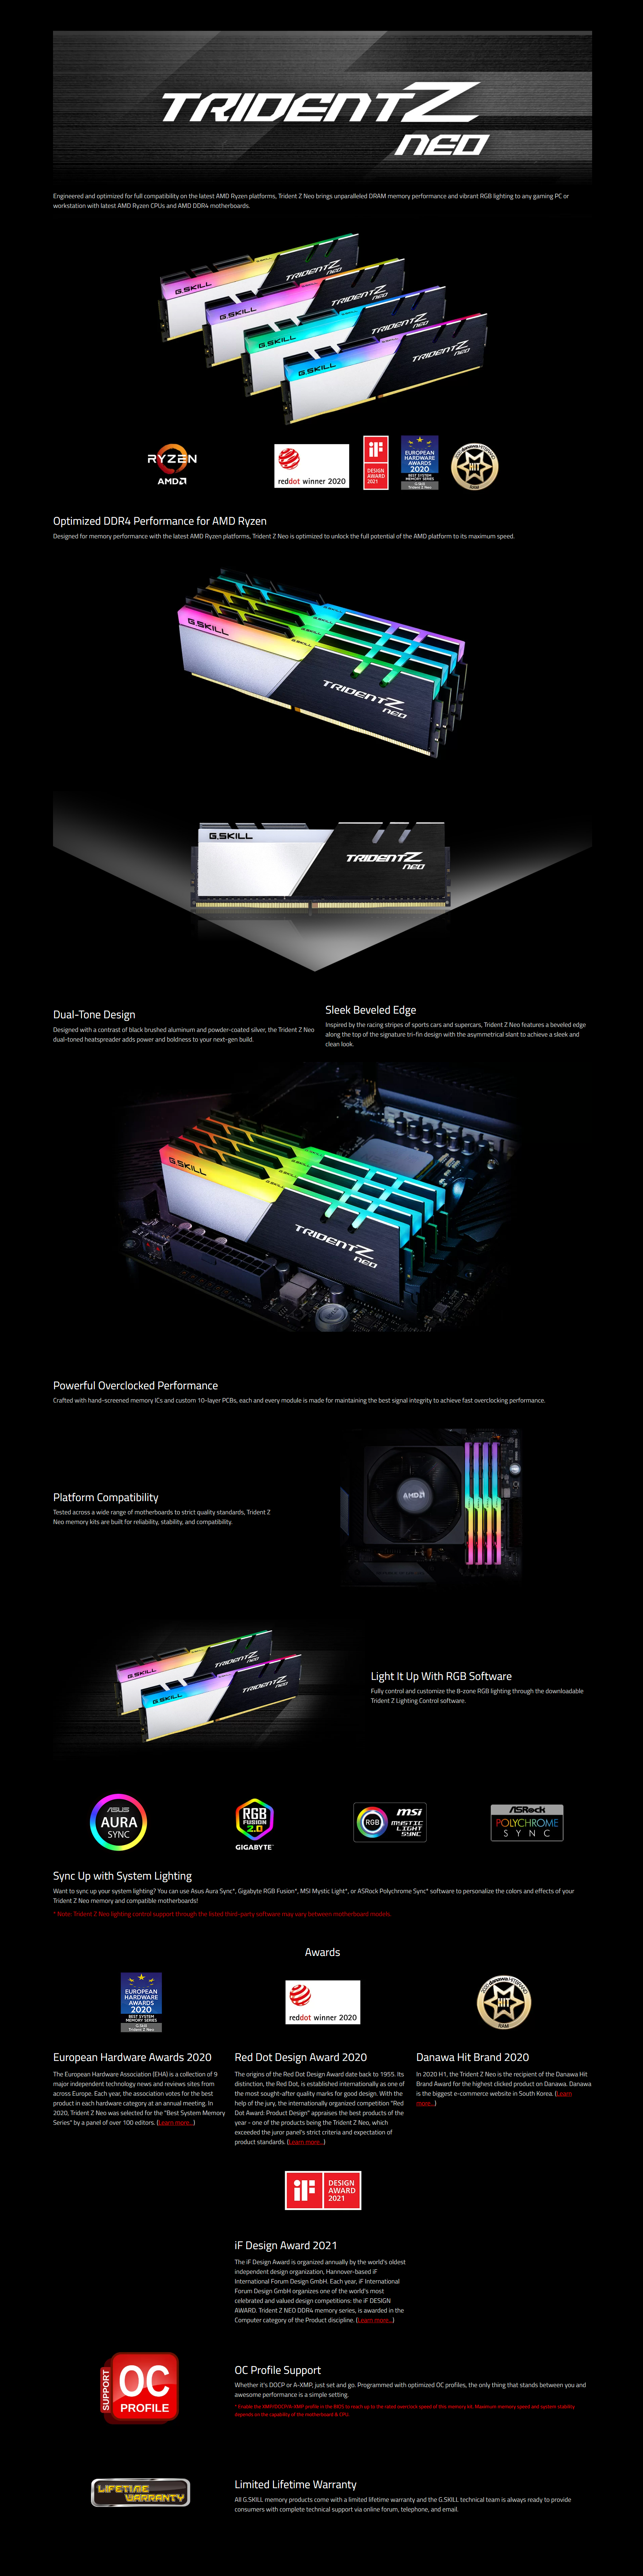 A large marketing image providing additional information about the product G.Skill 16GB Kit (2x8GB) DDR4 Trident Z RGB Neo C16 3600Mhz - Black - Additional alt info not provided